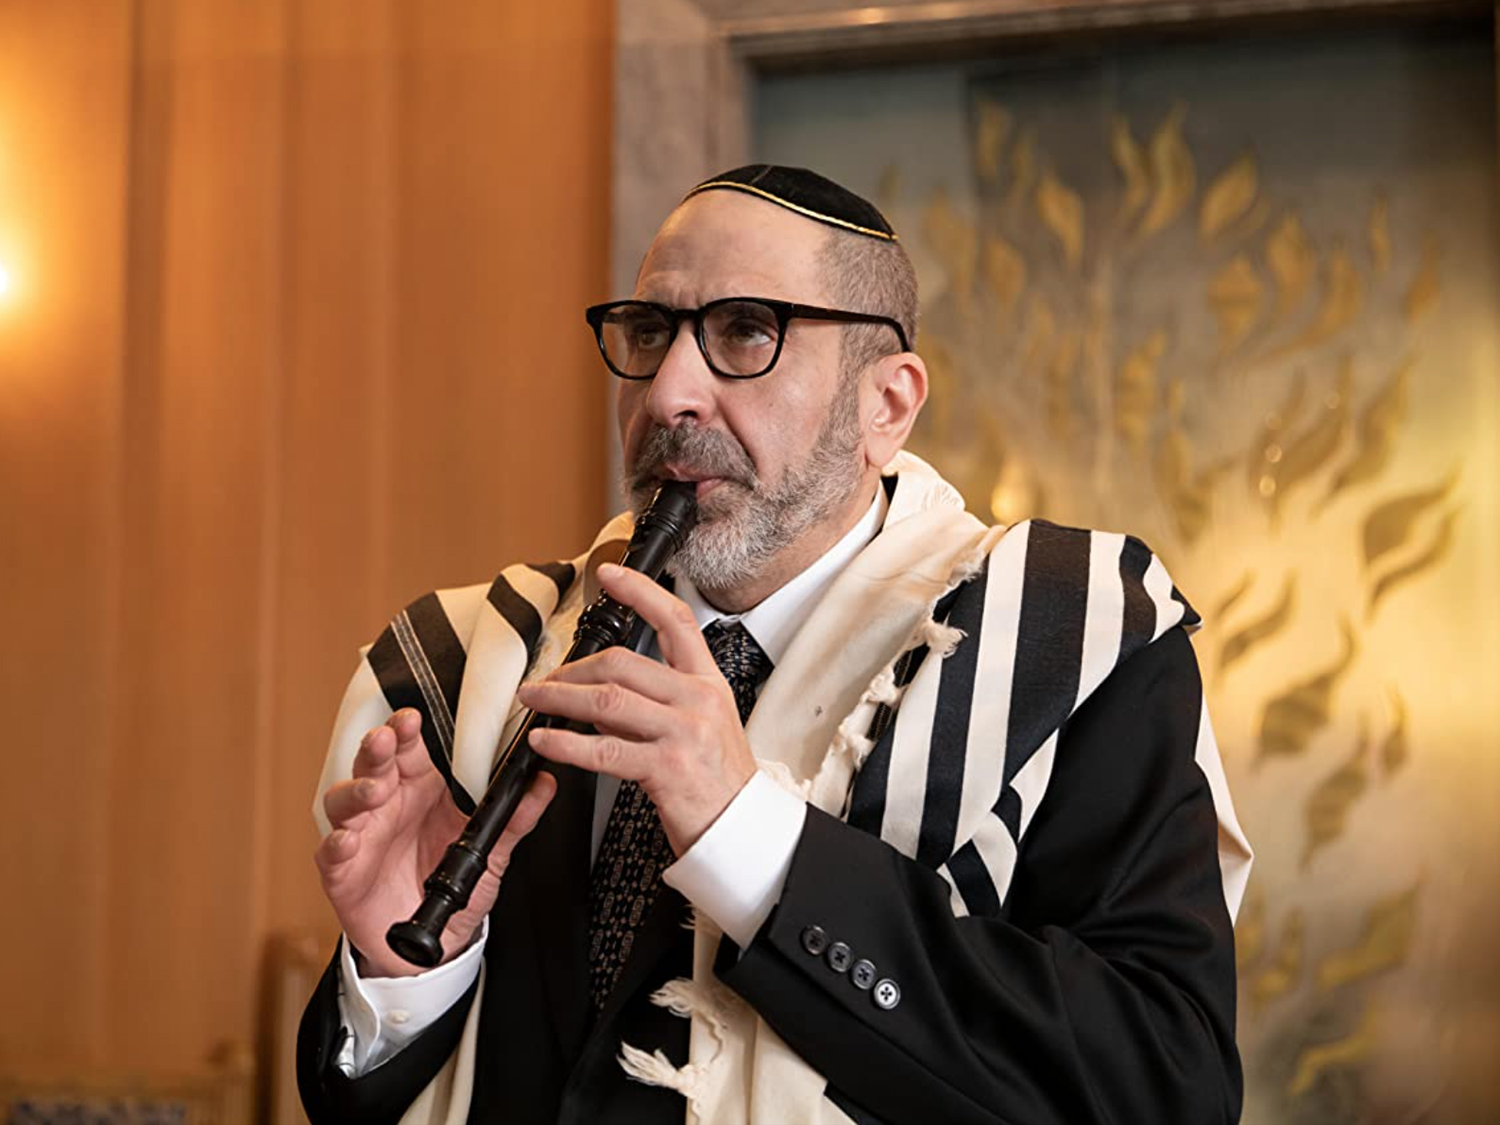 Dave Attell portrays a rabbi on "Life & Beth." Photo by Marcus Price/Hulu